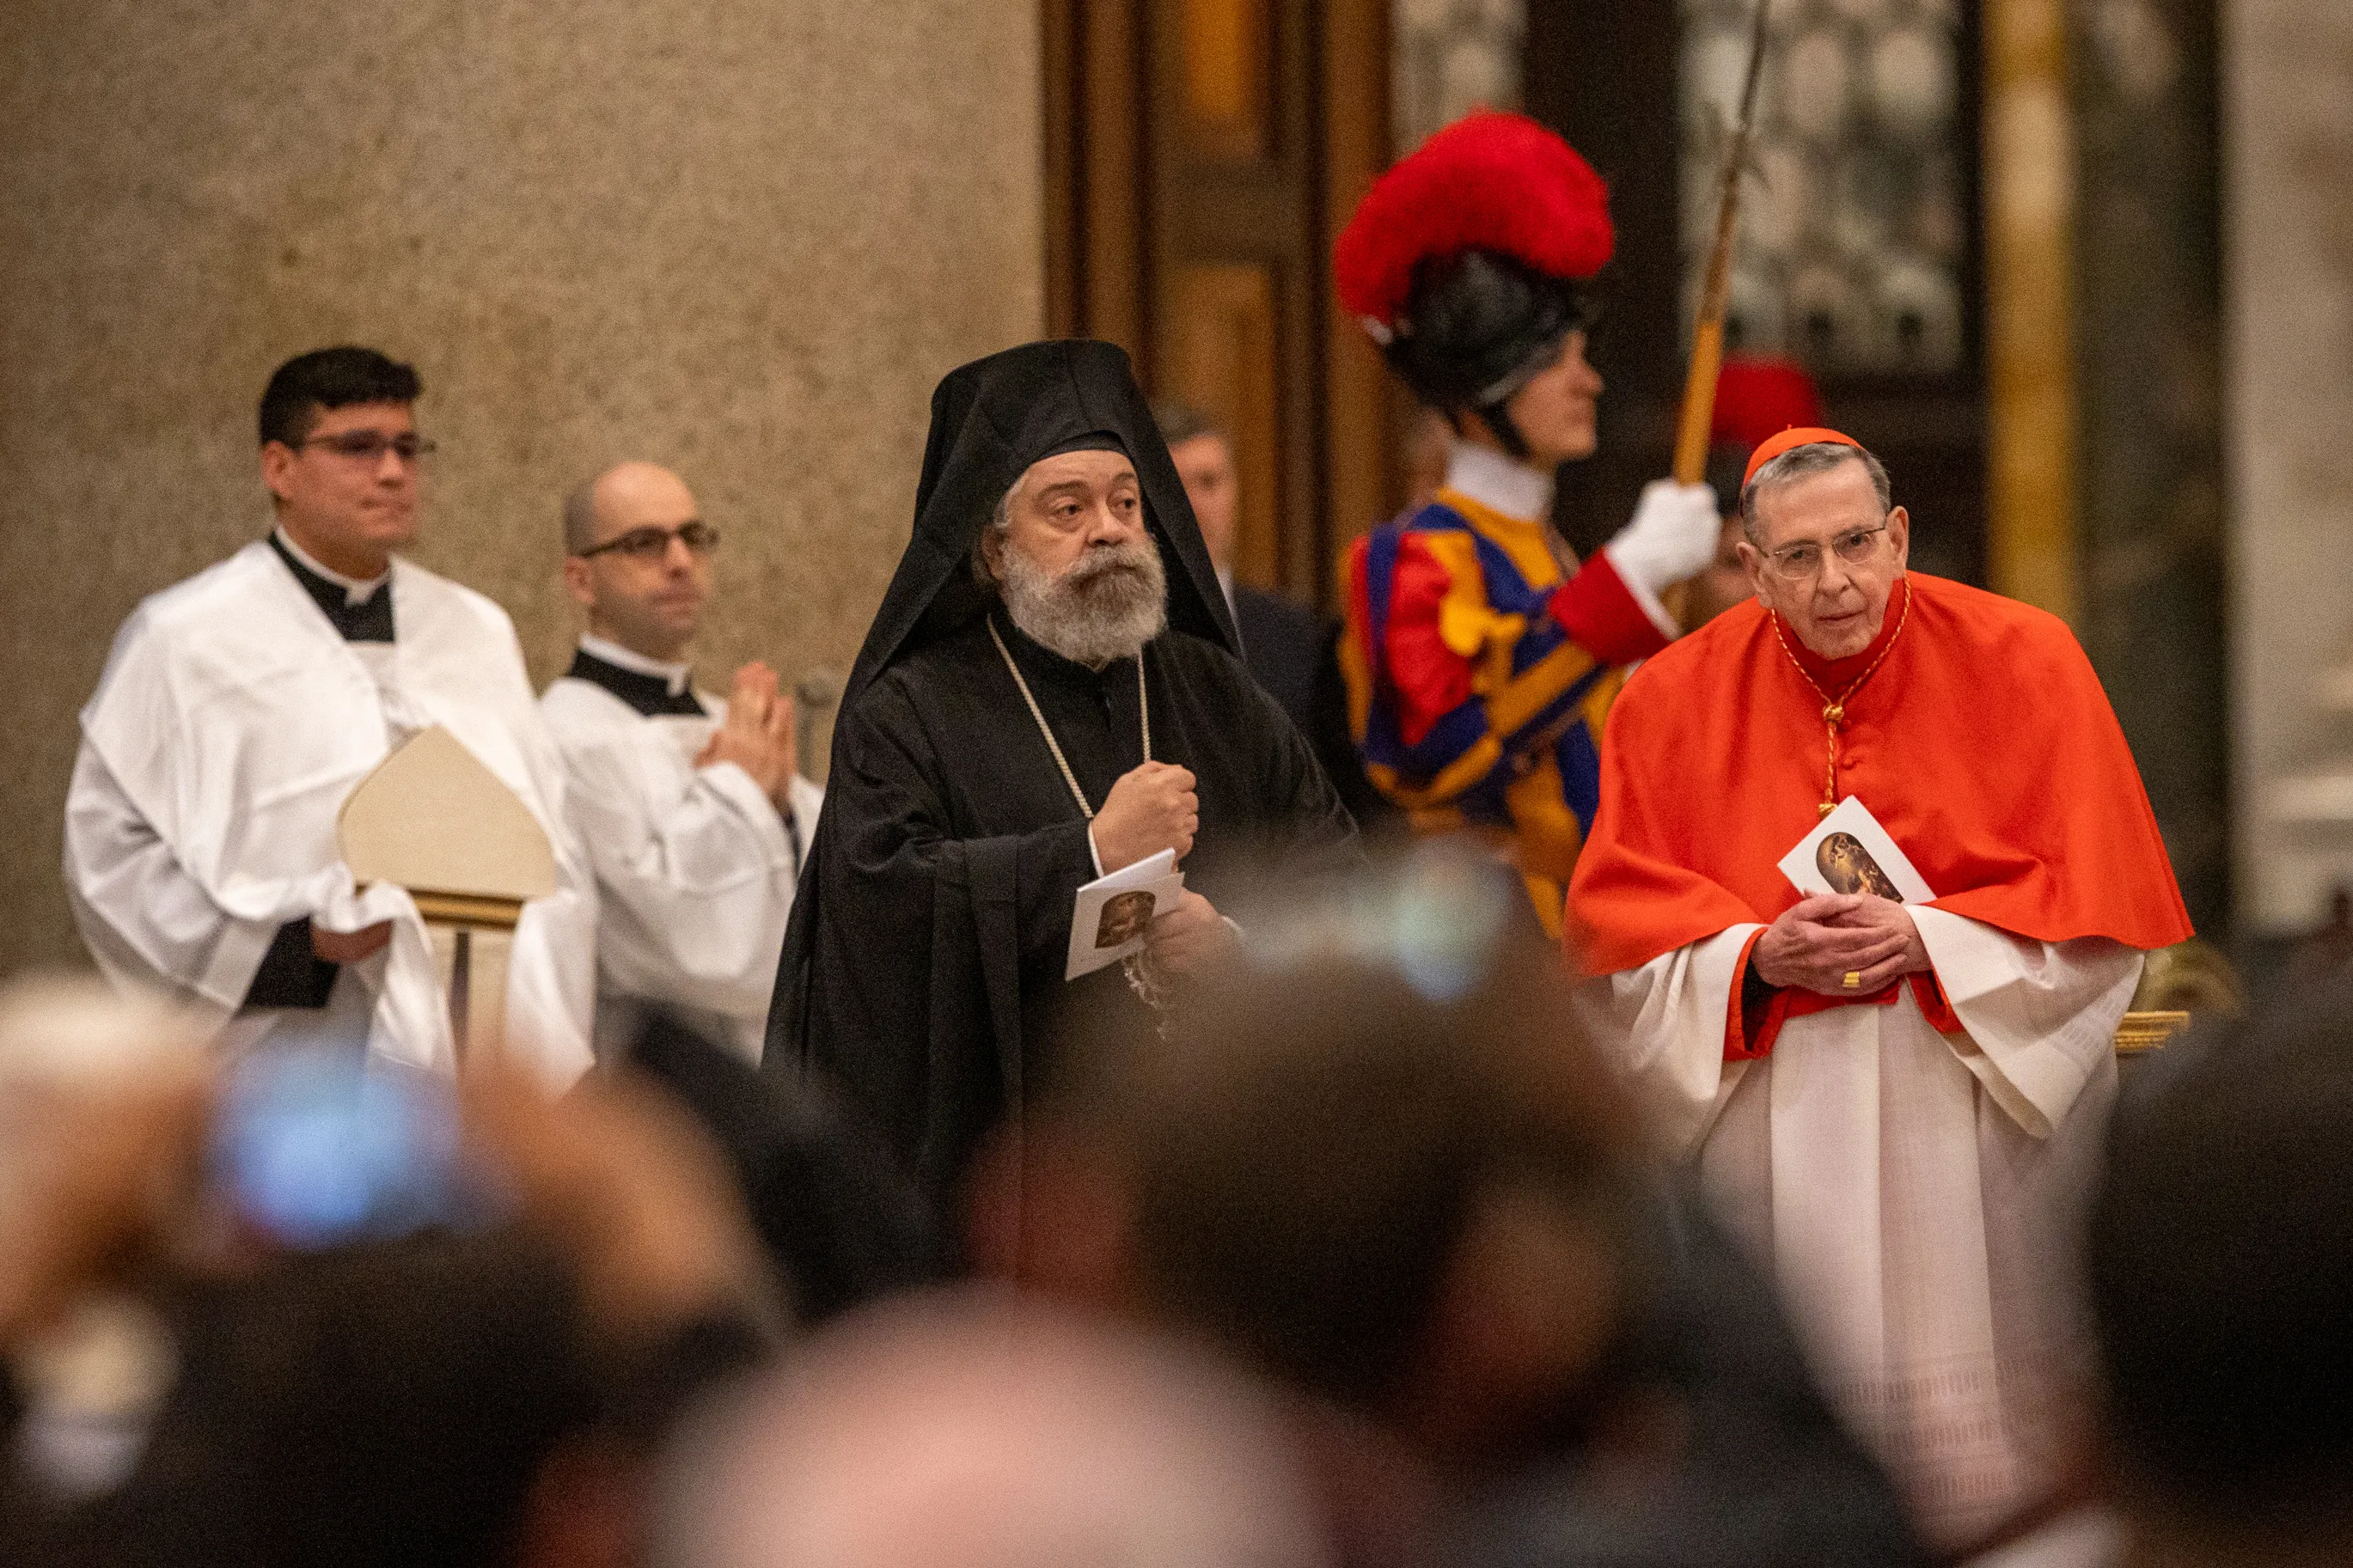 Metropolitan Polycarp of Italy, representing the Ecumenical Patriarchate of Constantinople, and Cardinal Kurt Koch, prefect of the Vatican Dicastery for Promoting Christian Unity, participate in an ecumenical second vespers at the Basilica of St. Paul Outside the Walls in Rome on the feast of the Conversion of St. Paul, Jan. 25, 2024. Credit: Daniel Ibañez/CNA